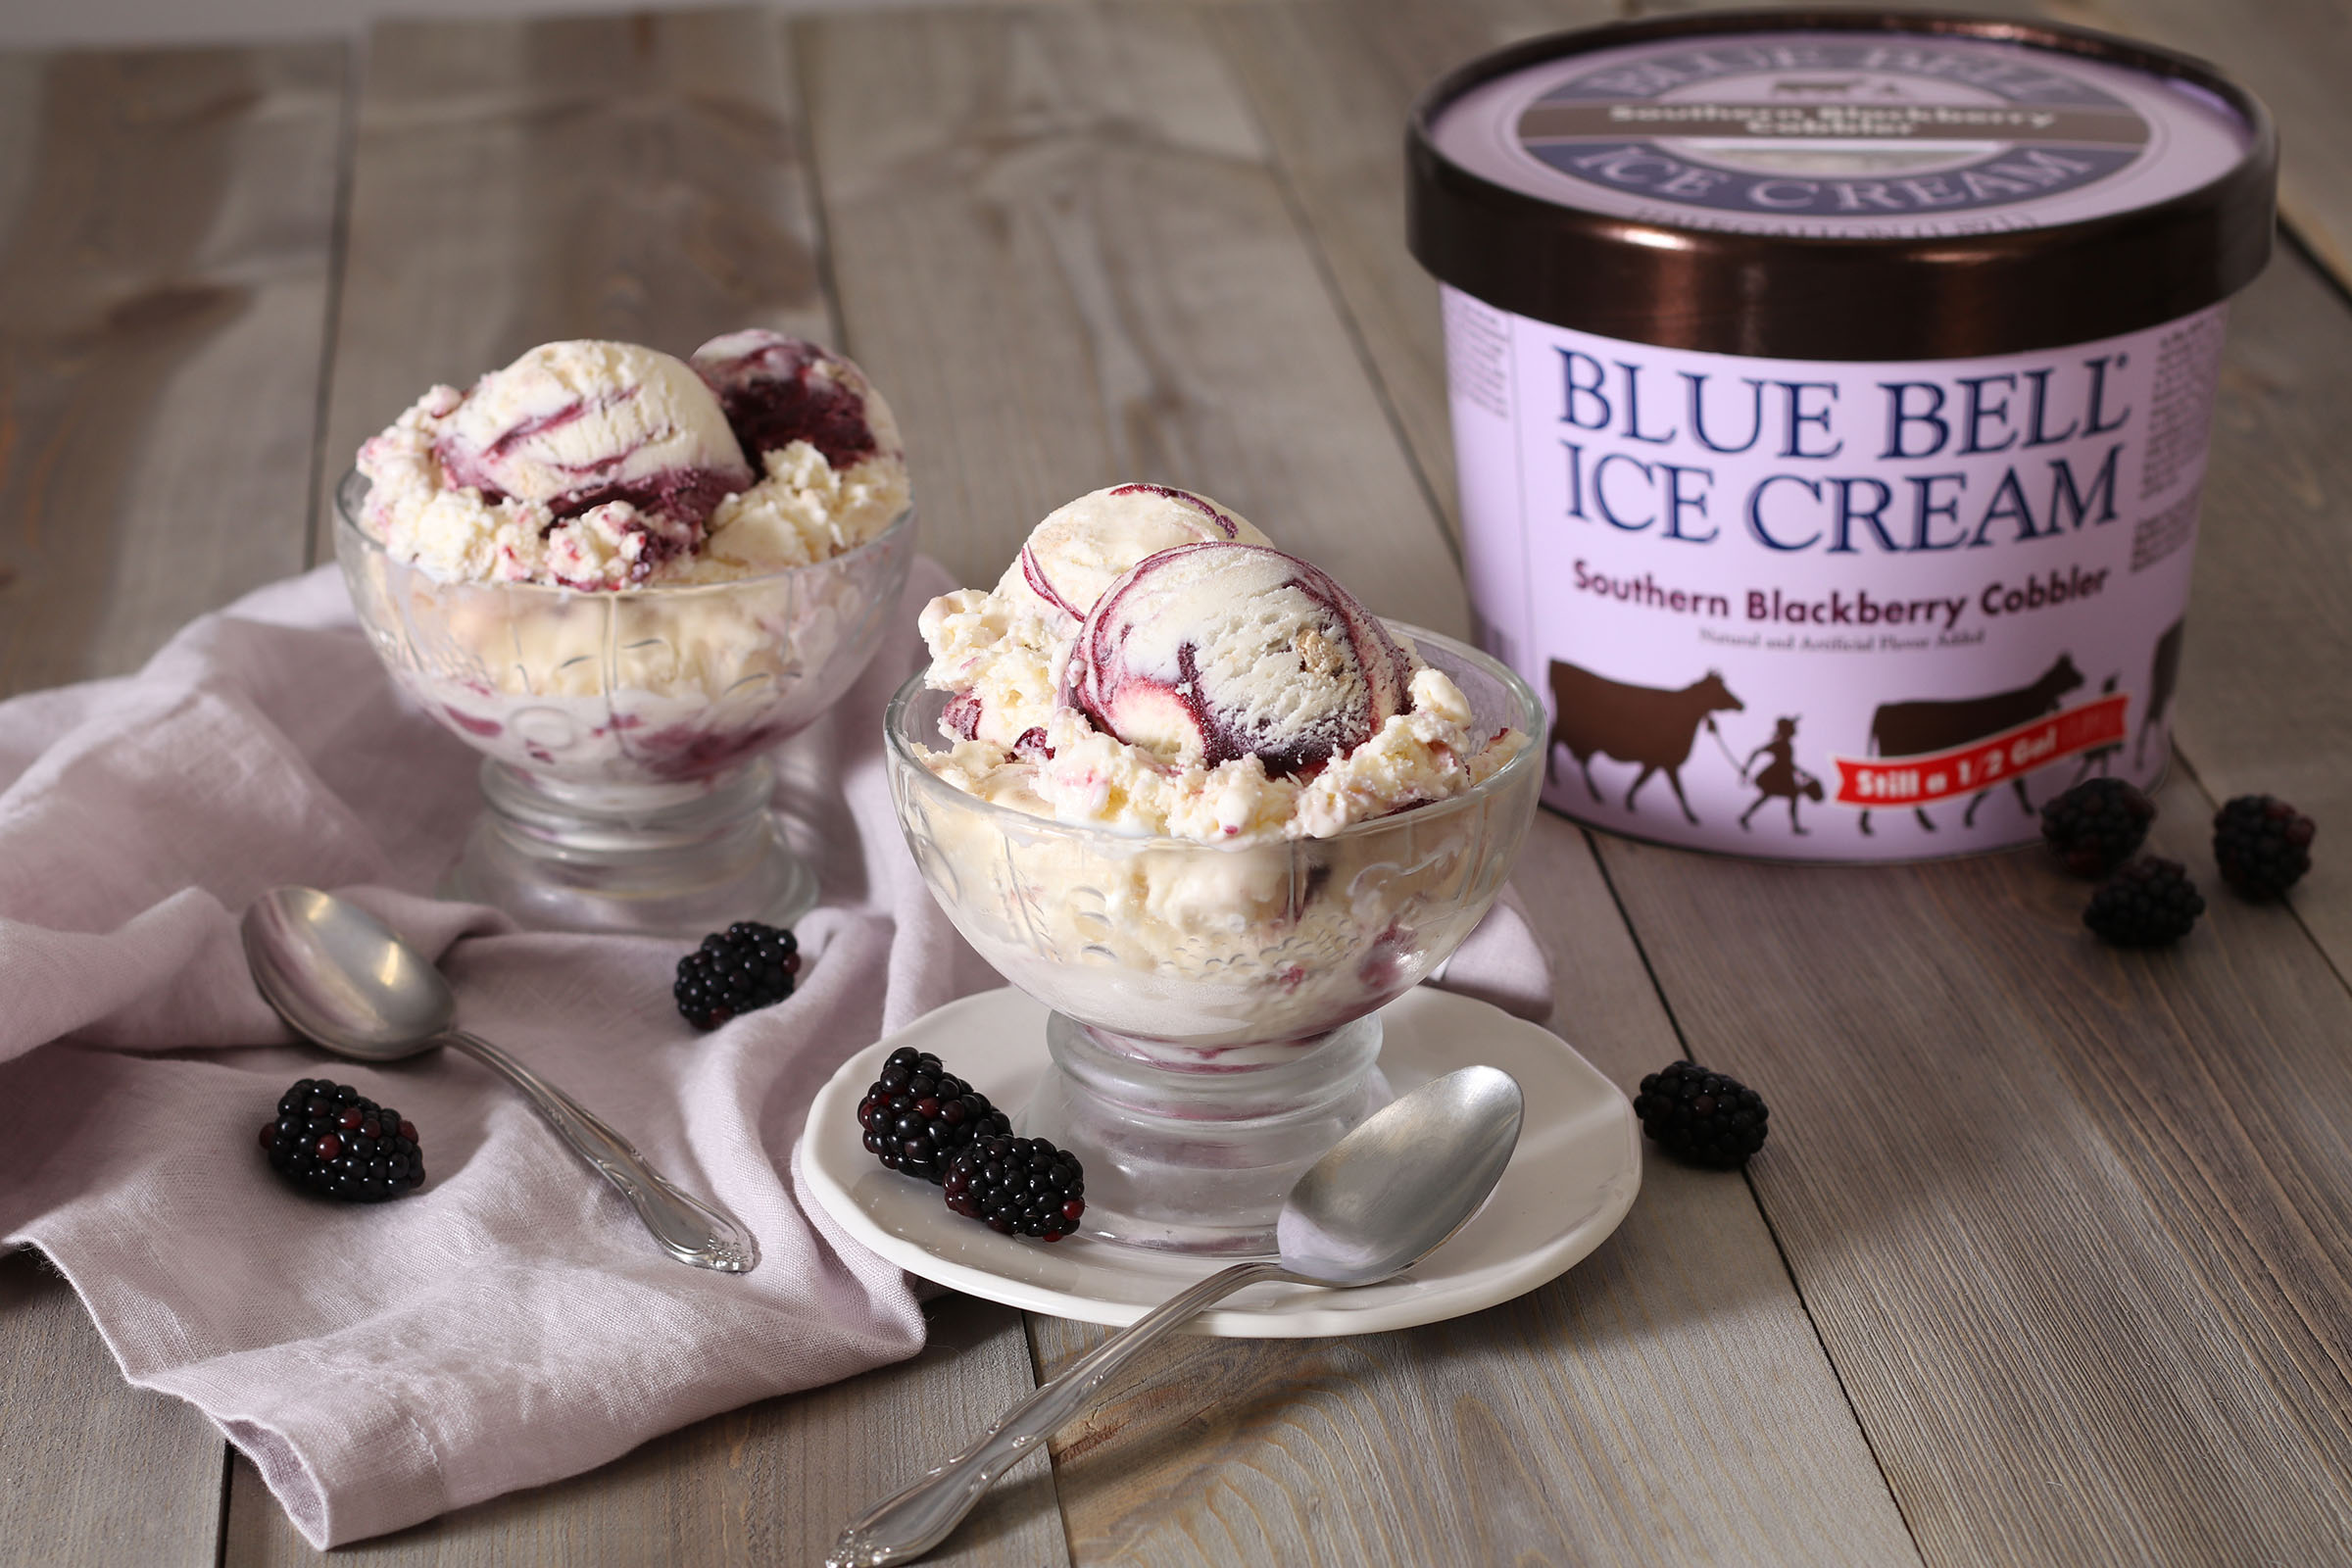 Two dishes of Southern Blackberry Cobbler ice cream next to a light purple half gallon container